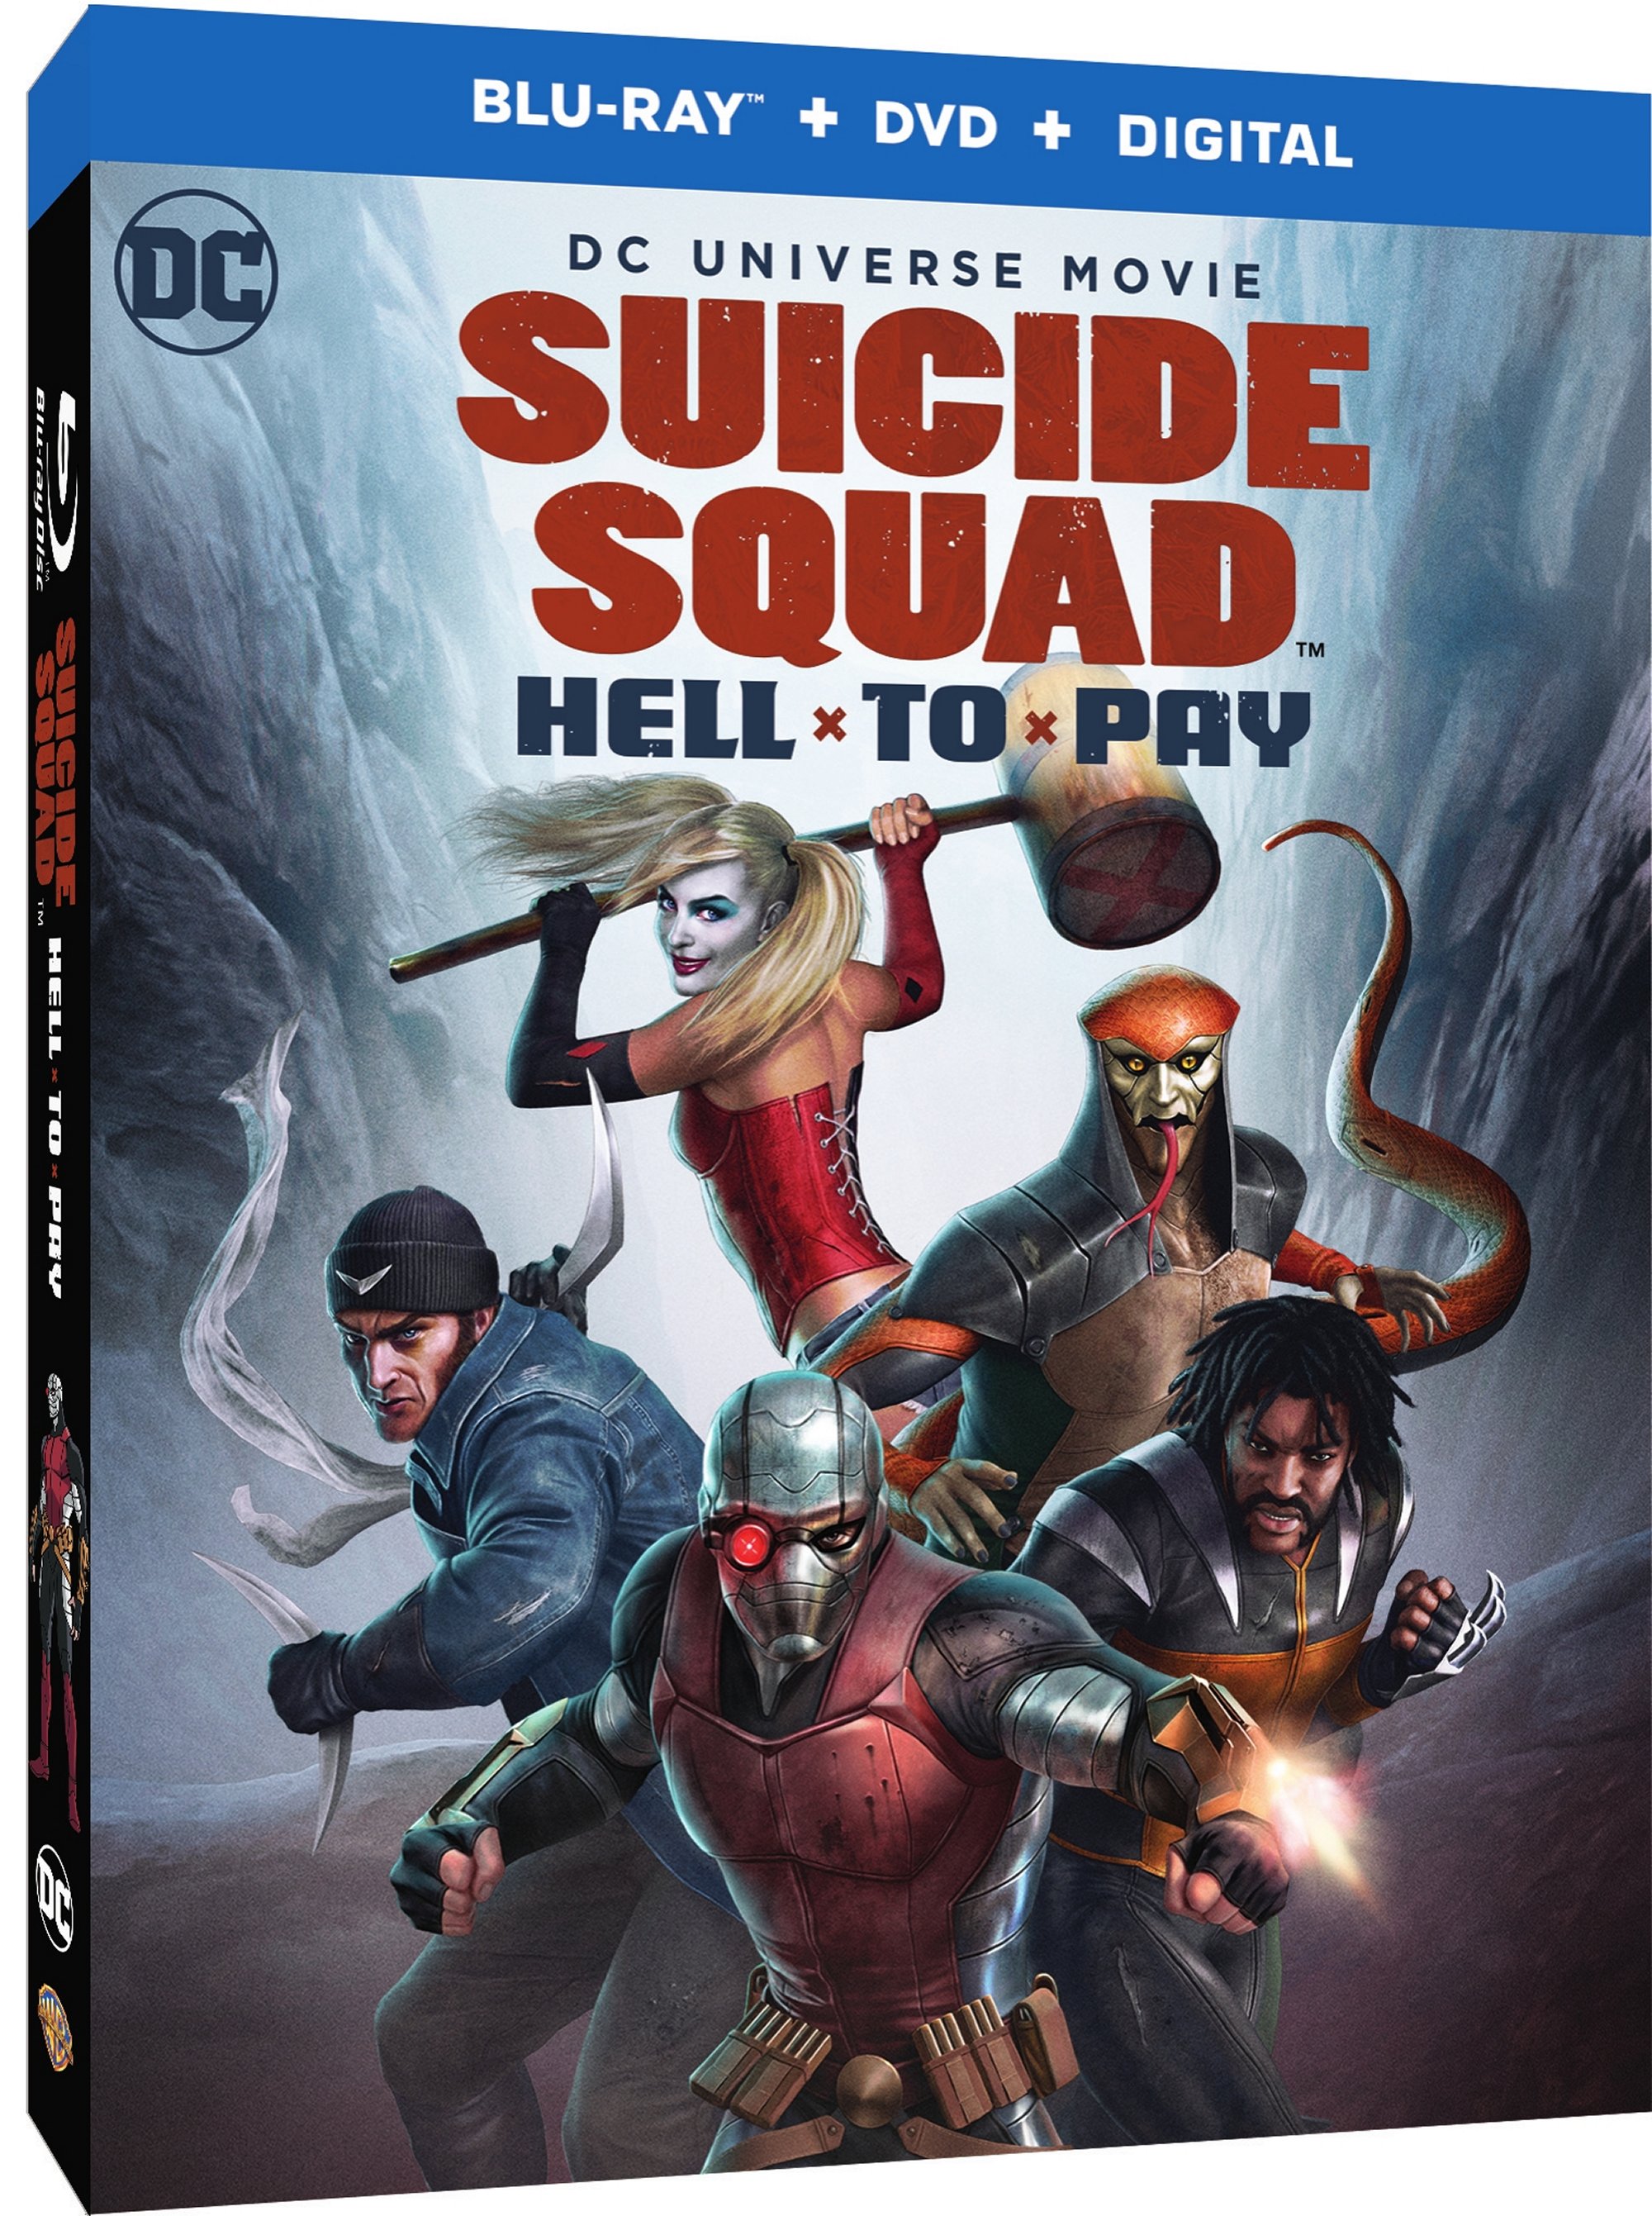 Suicide Squad: Hell to Pay Bluray Review